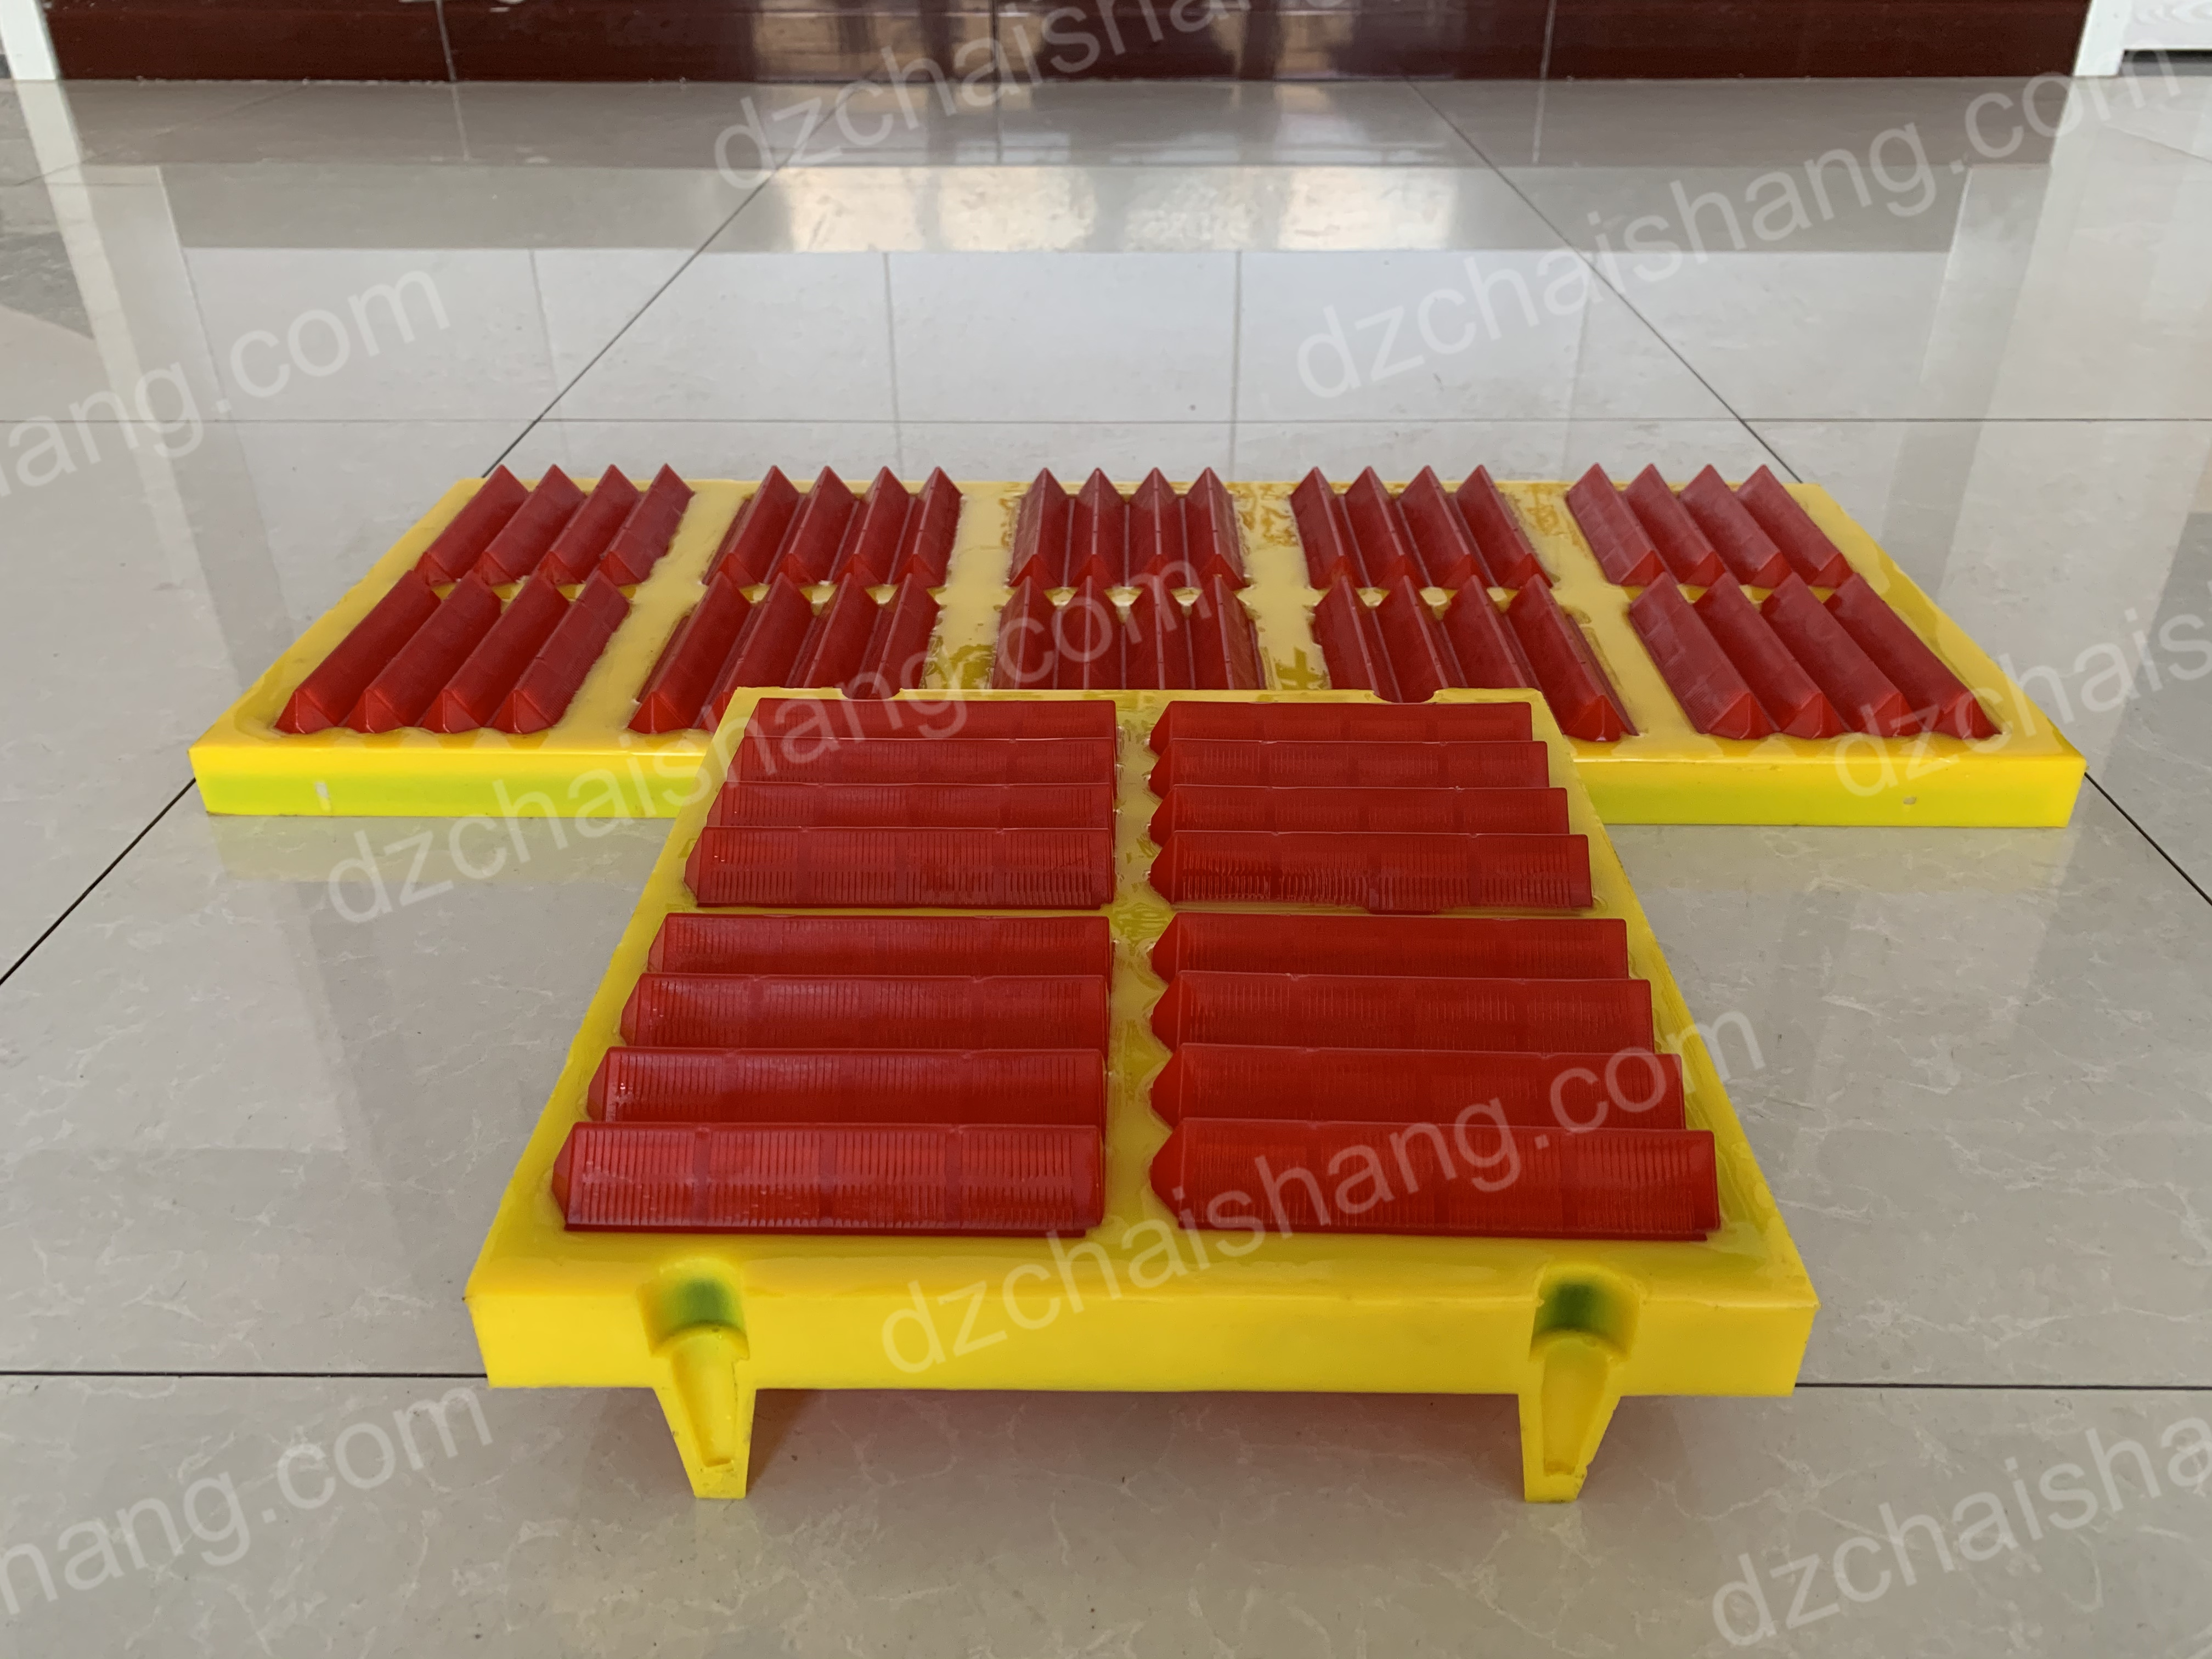 Dezhou Chaishang Trading takes you to understand the benefits of “Polyurethane Screen”!-CHAISHANG | Polyurethane Screen,Rubber Screen PanelsHigh frequency screen mesh,Belt Cleaner,Flotation Cell